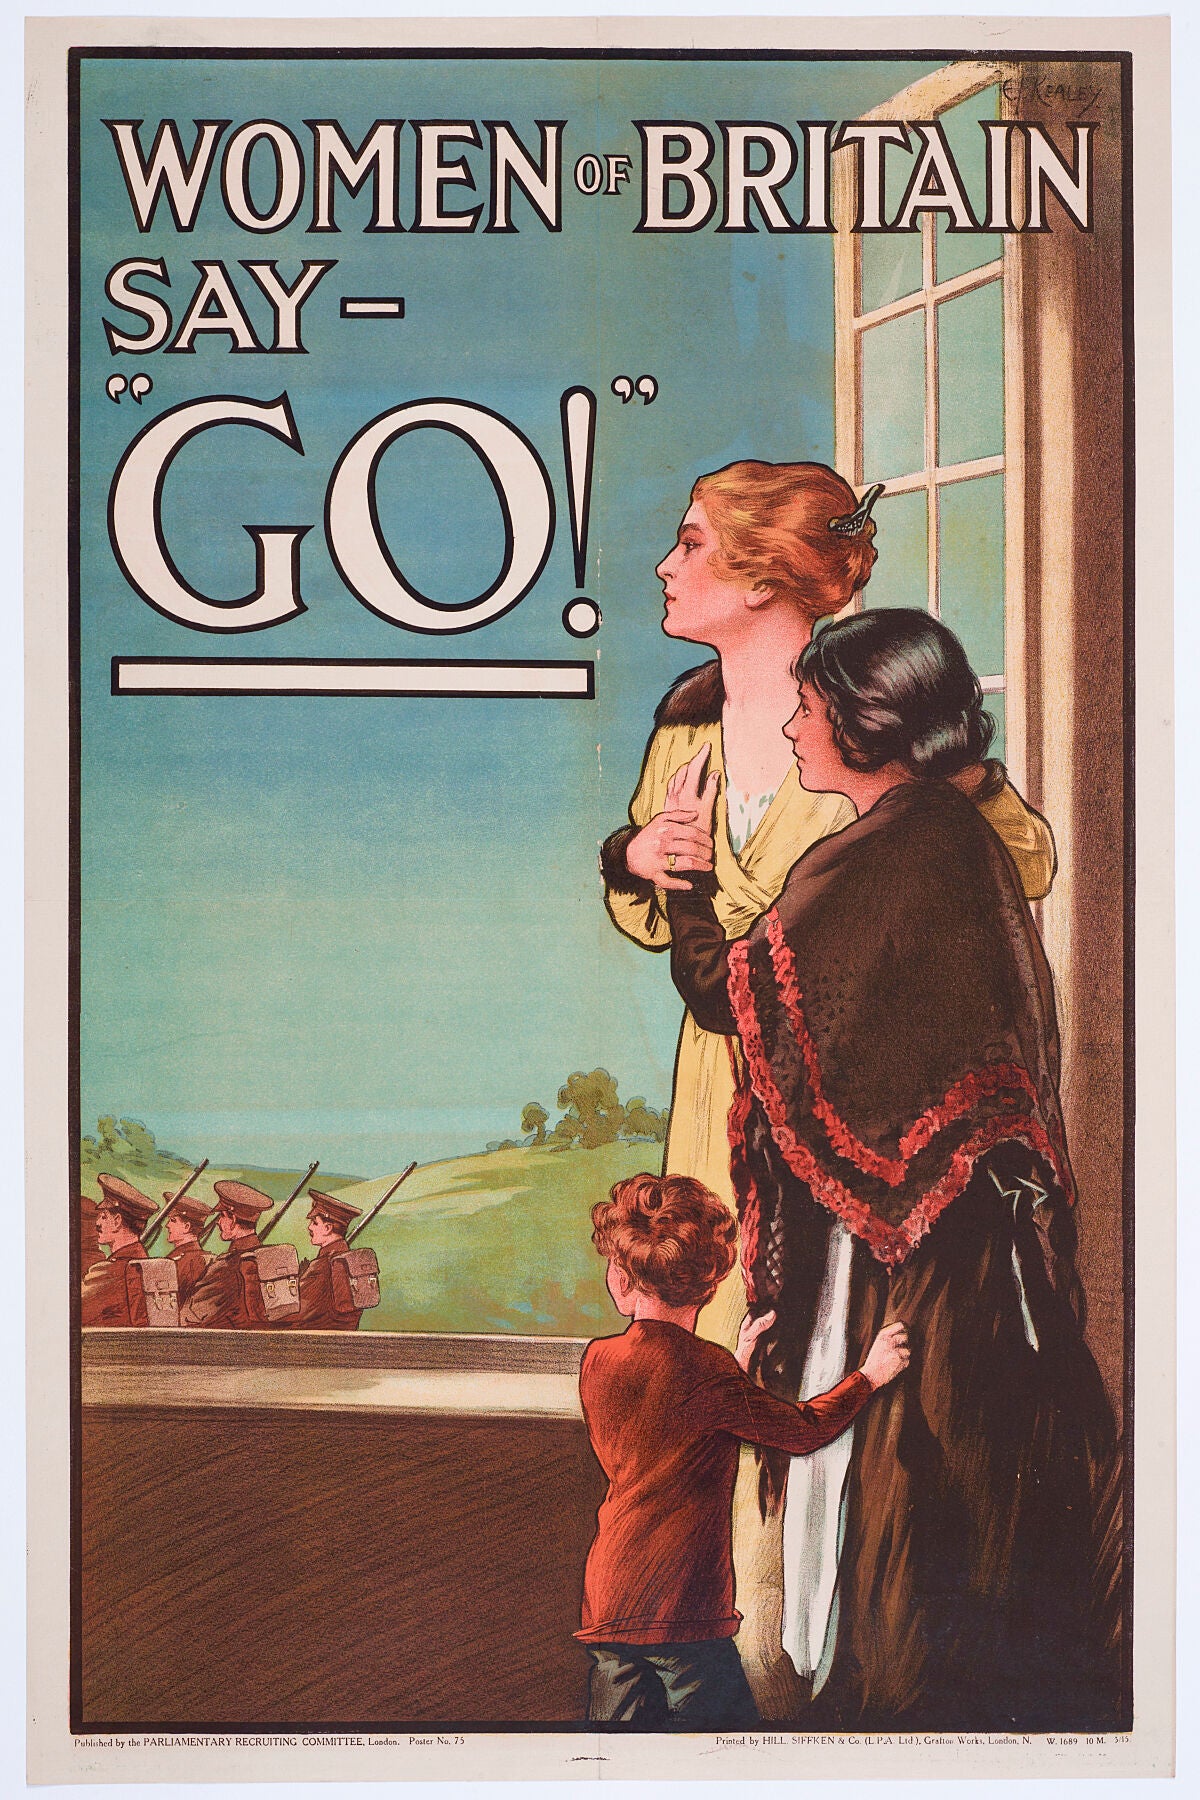 Poster, 'Women of Britain say - Go  Production Parliamentary Recruiting Committee; publisher; May 1915, United Kingdom